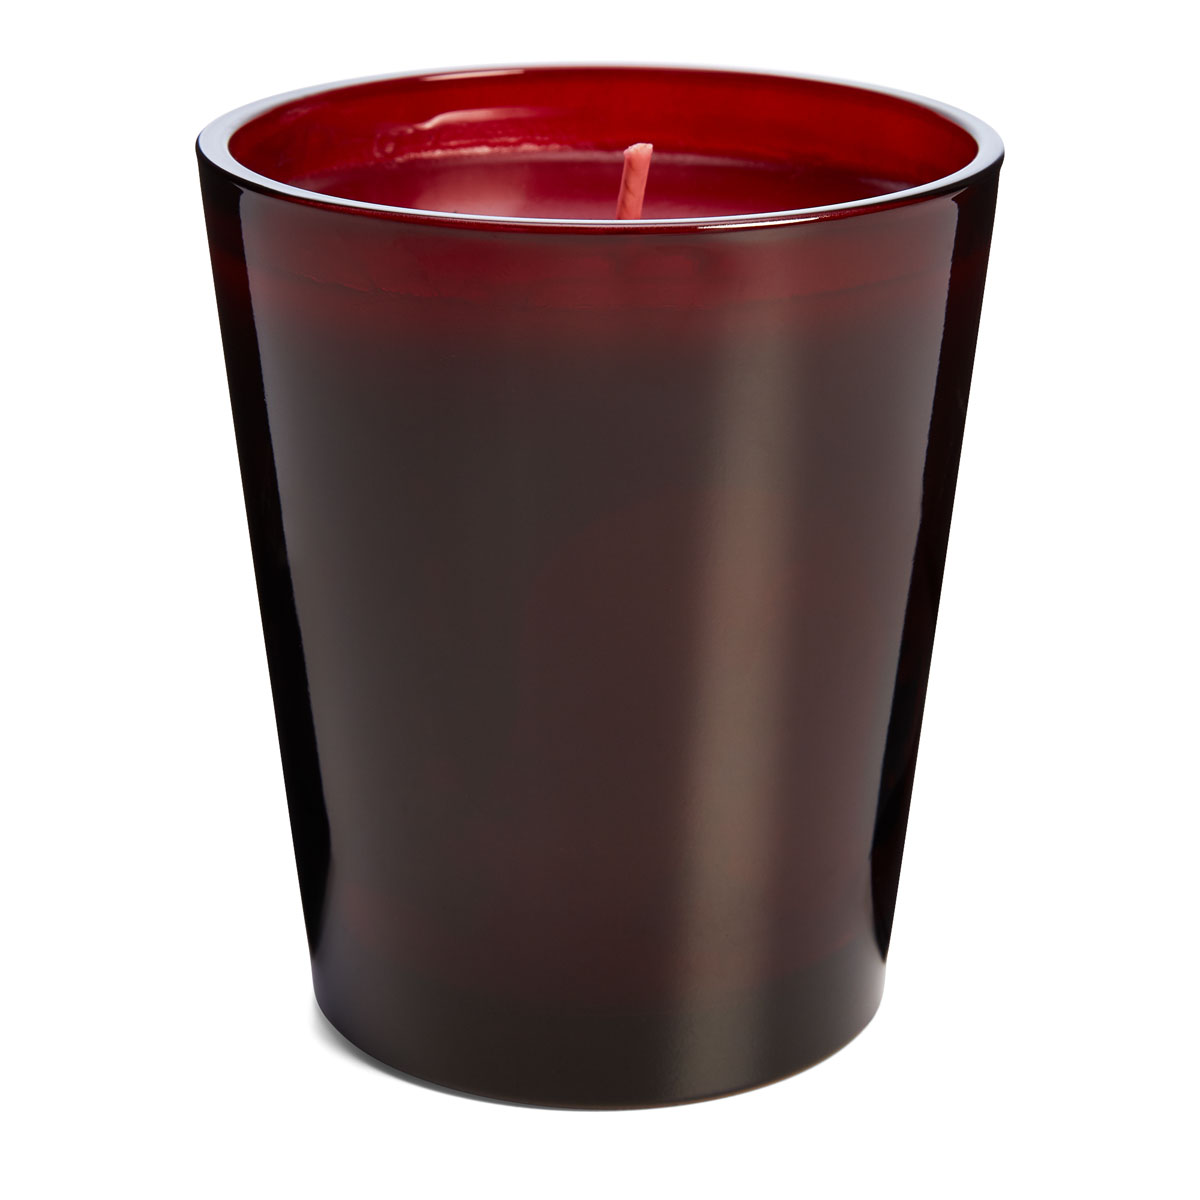 Ralph Lauren Holiday Single Wick Candle